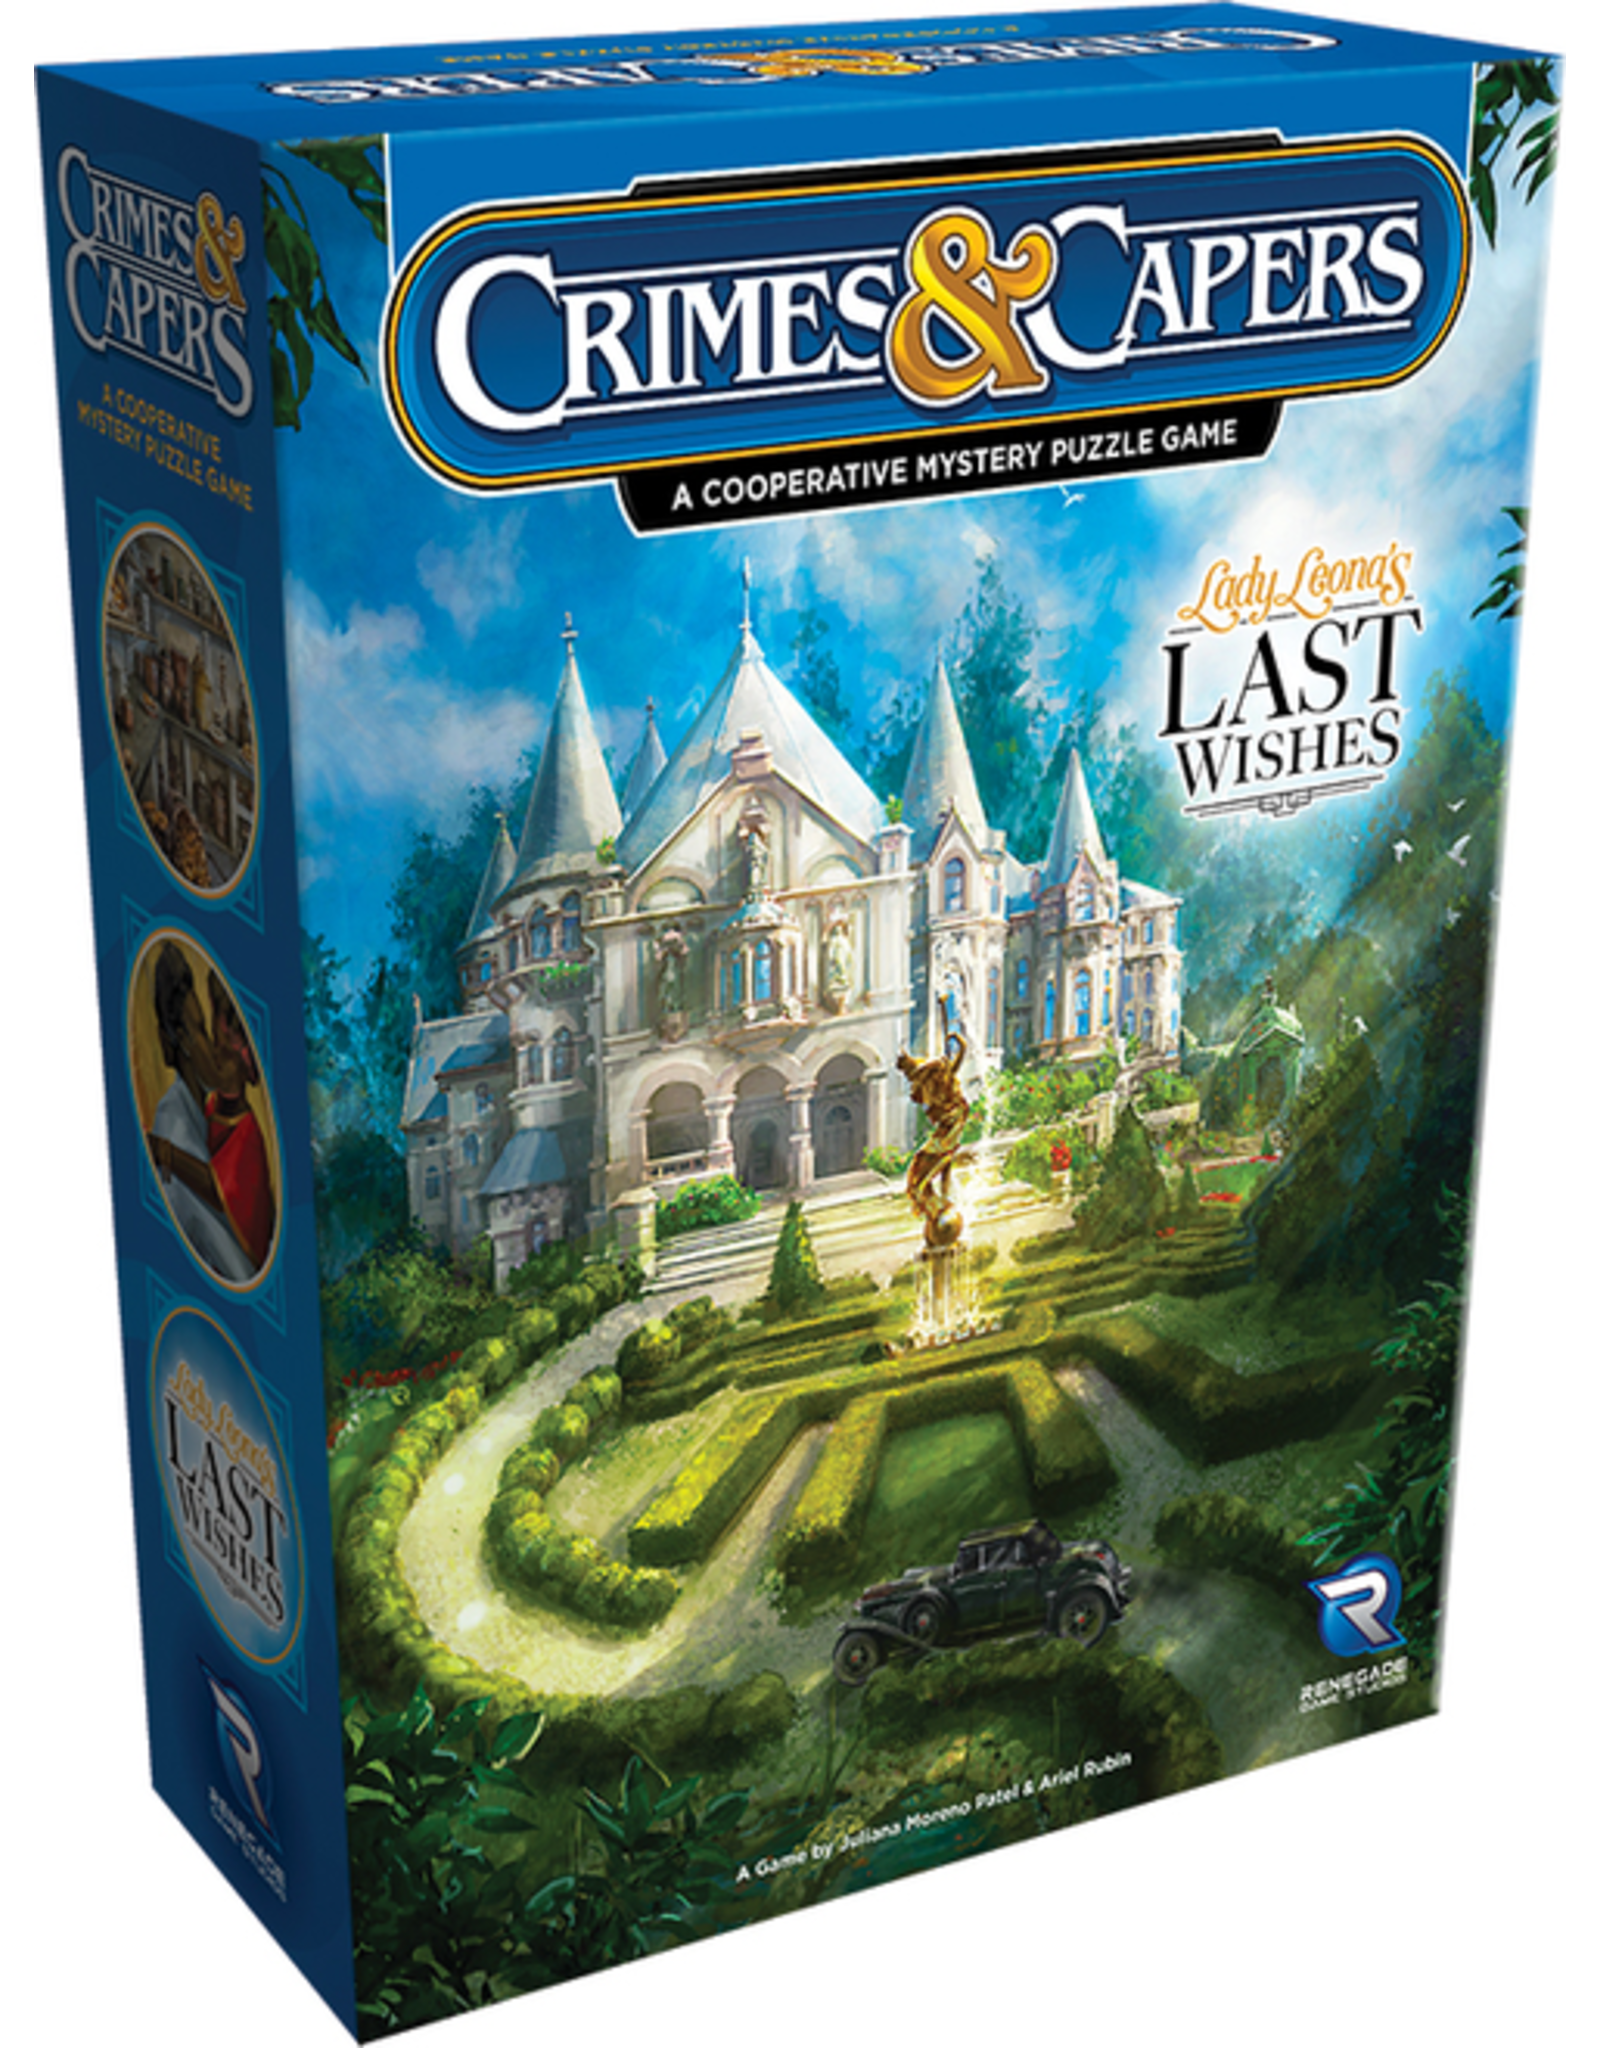 Crimes & Capers: Lady Leona's Last Wishes 40% off